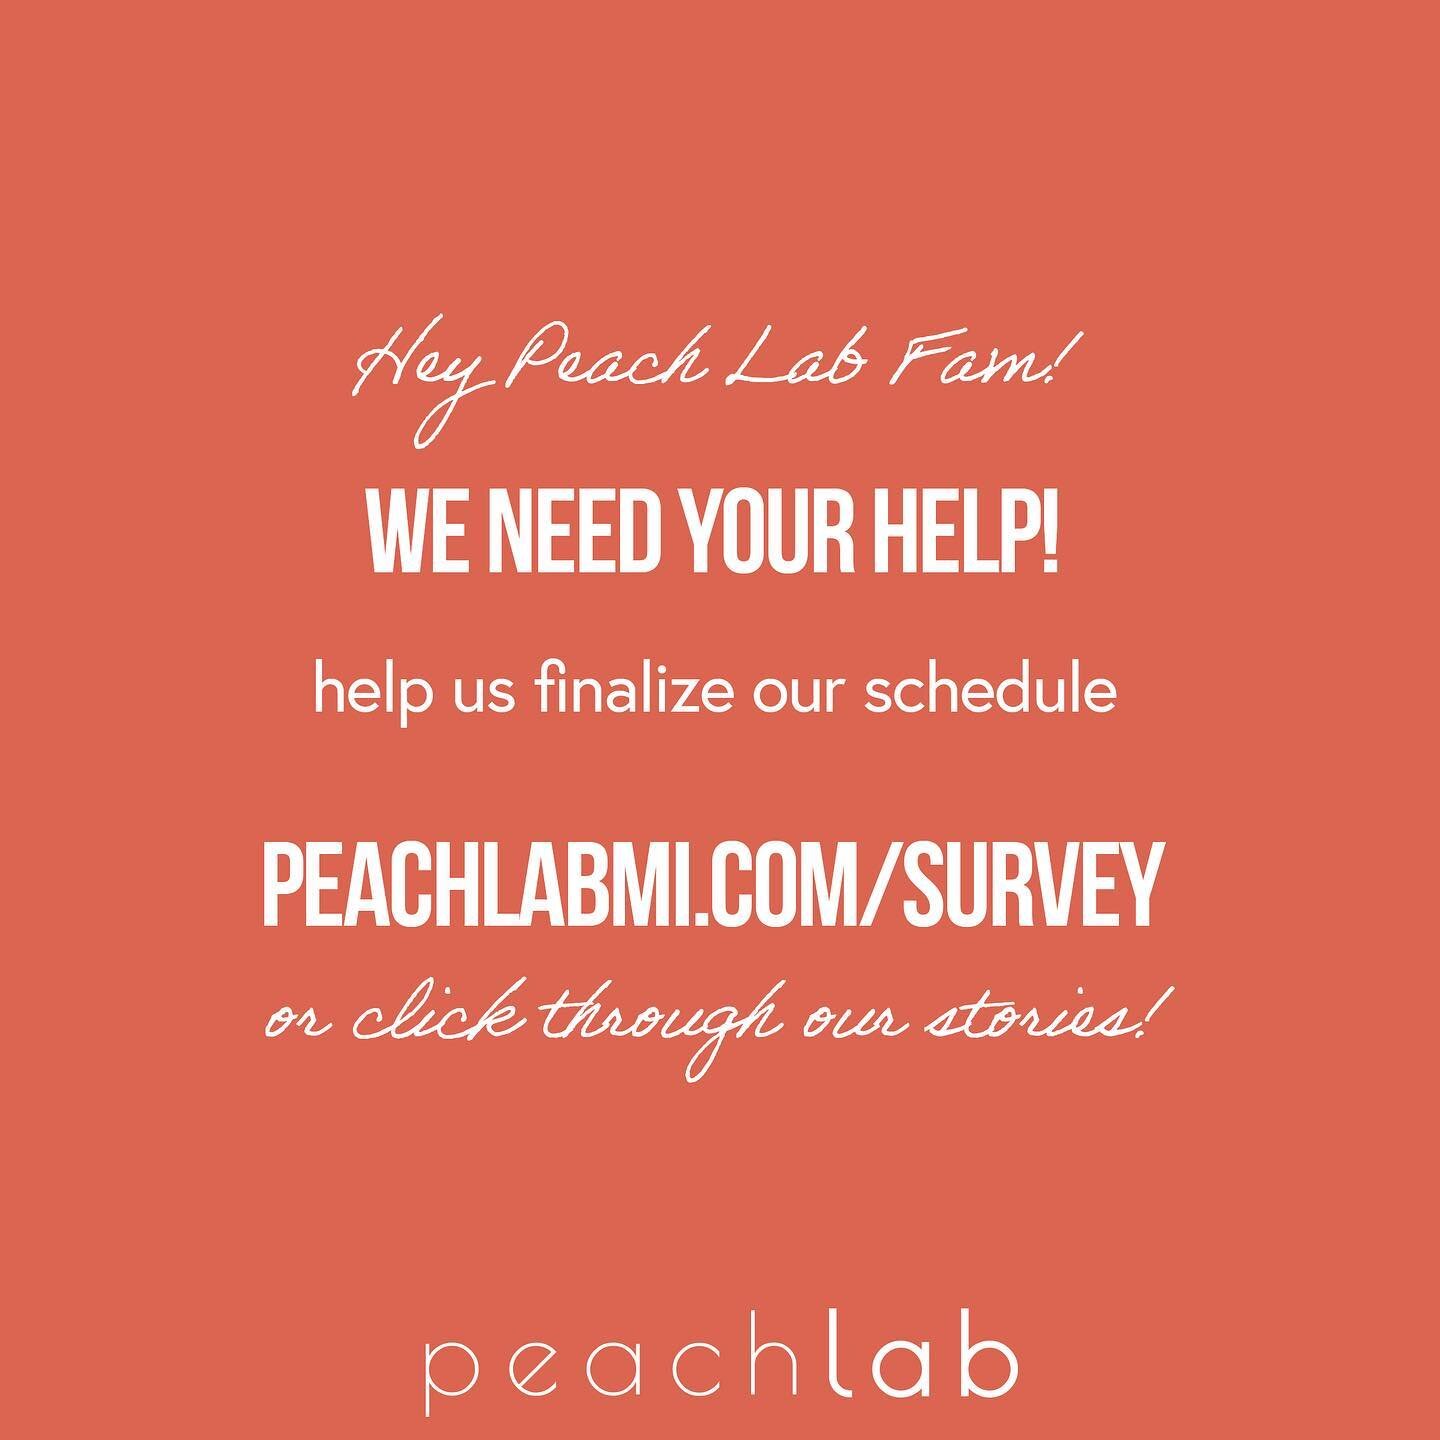 Hello! We&rsquo;re finalizing our schedule and would appreciate your help figuring out our schedule! You have three options to help us out:

1. Type peachlabmi.com/survey into your browser and fill out the two-question survey; 
2. Click the link in b